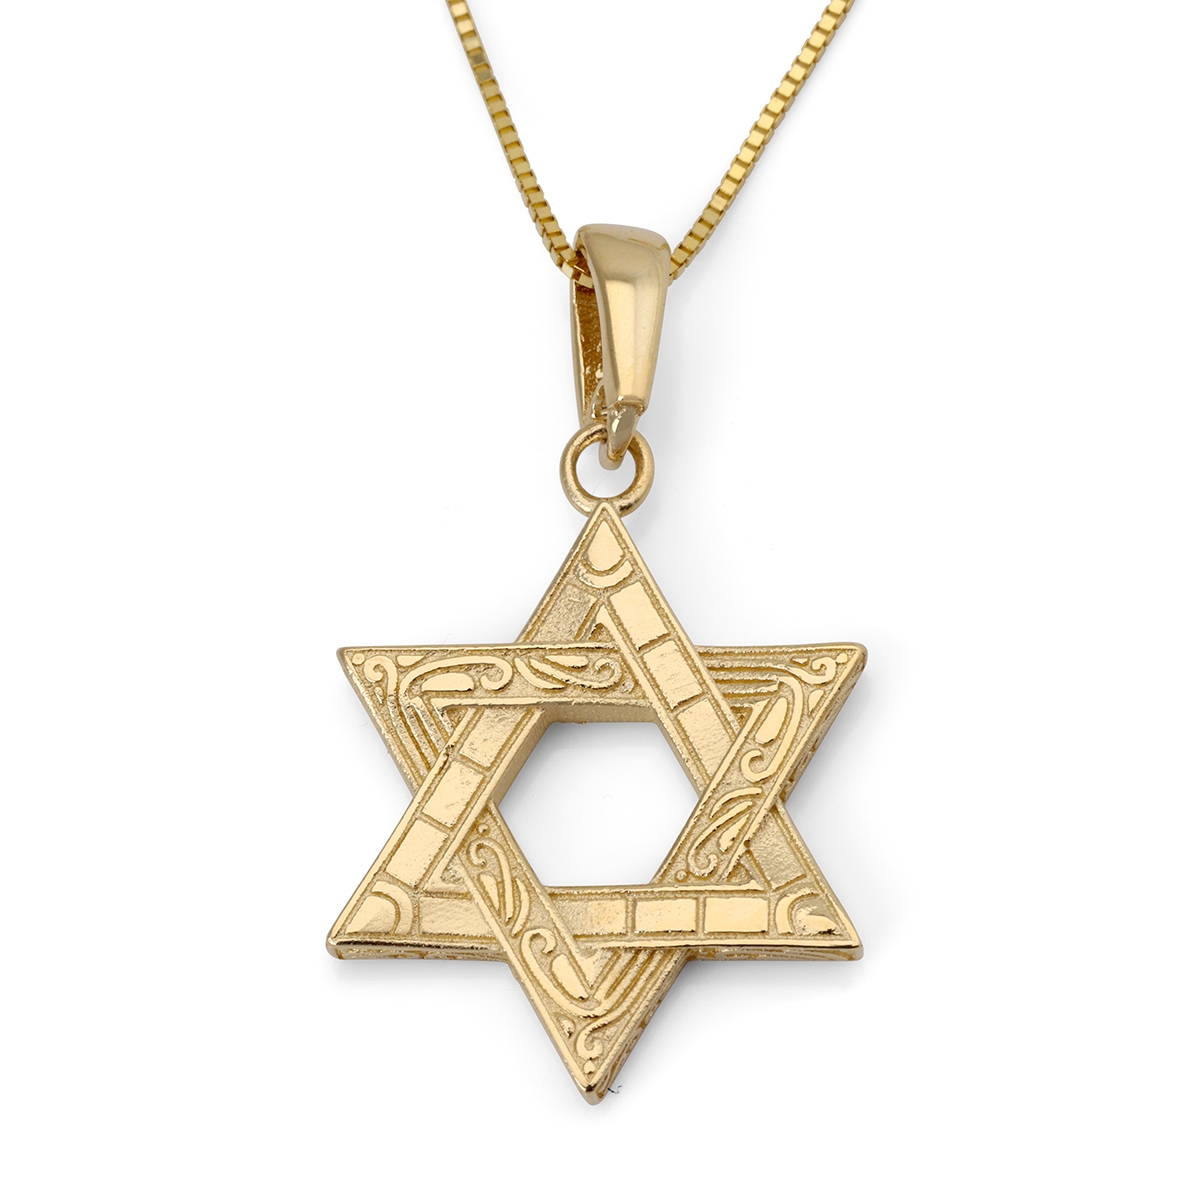 Luxurious 14K Gold Star of David Pendant Necklace With Ancient Mosaic Design - 1